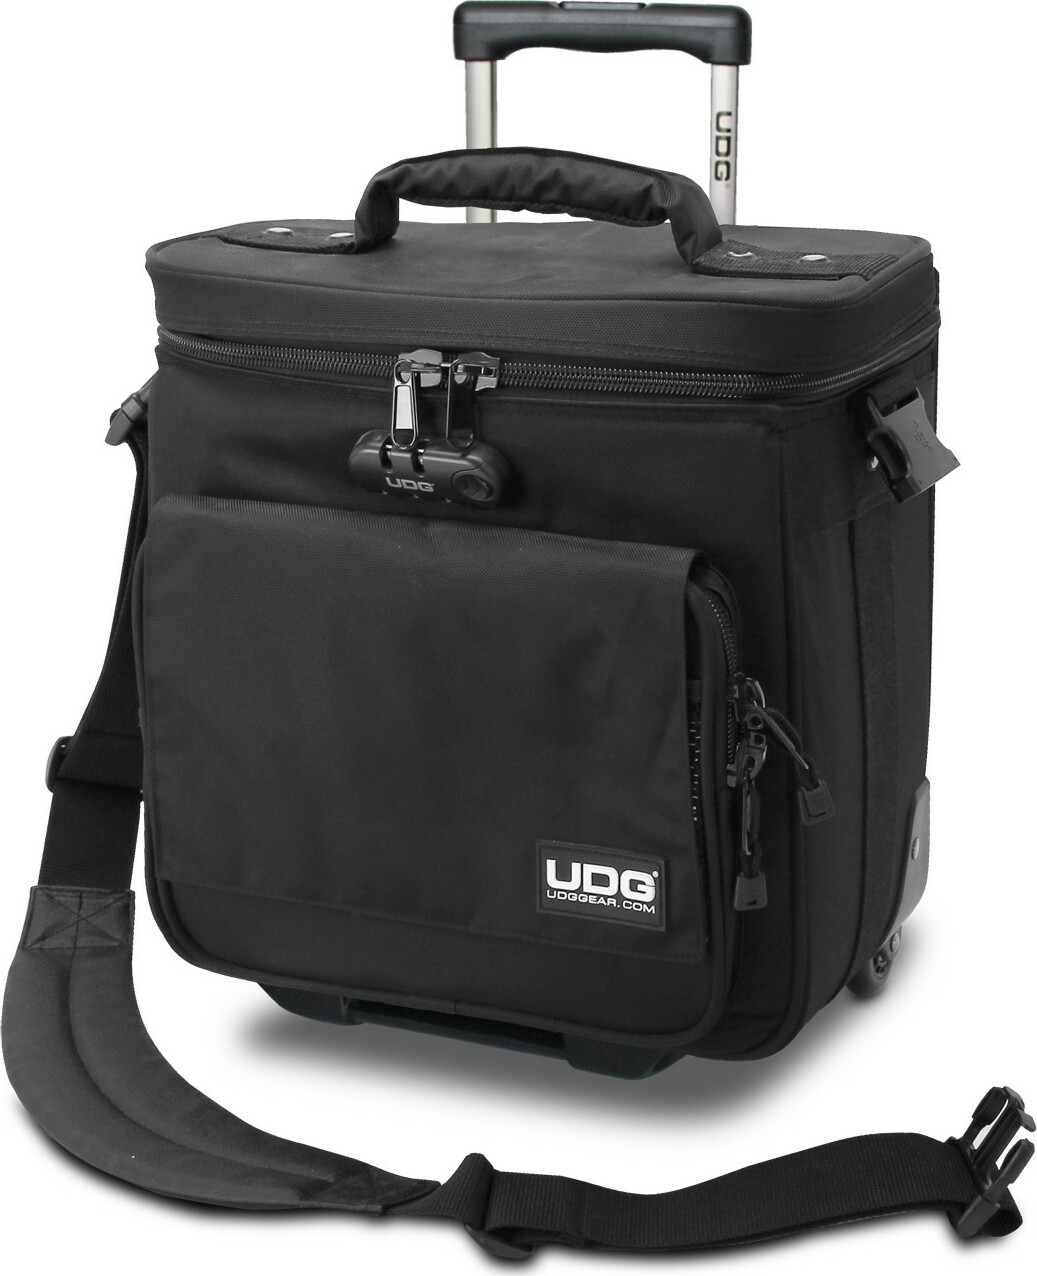 Udg Ultimate Trolley To Go Black - Trolley DJ - Main picture